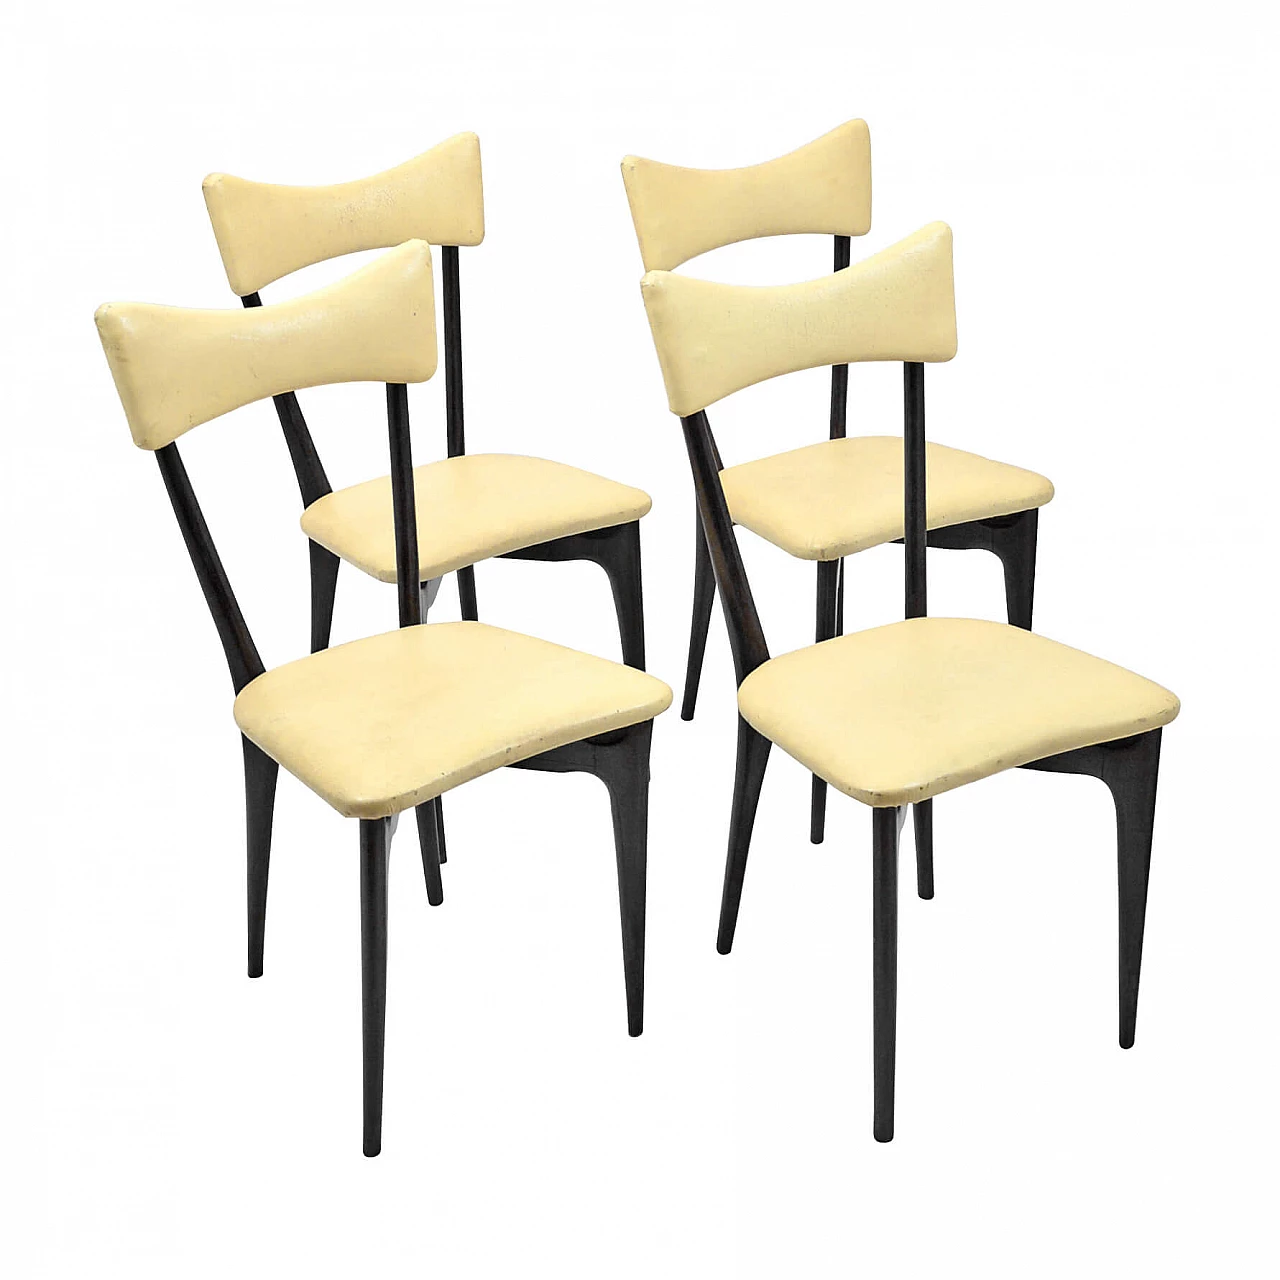 4 Chairs by Ico Parisi for Ariberto Colombo, 1954 1143387